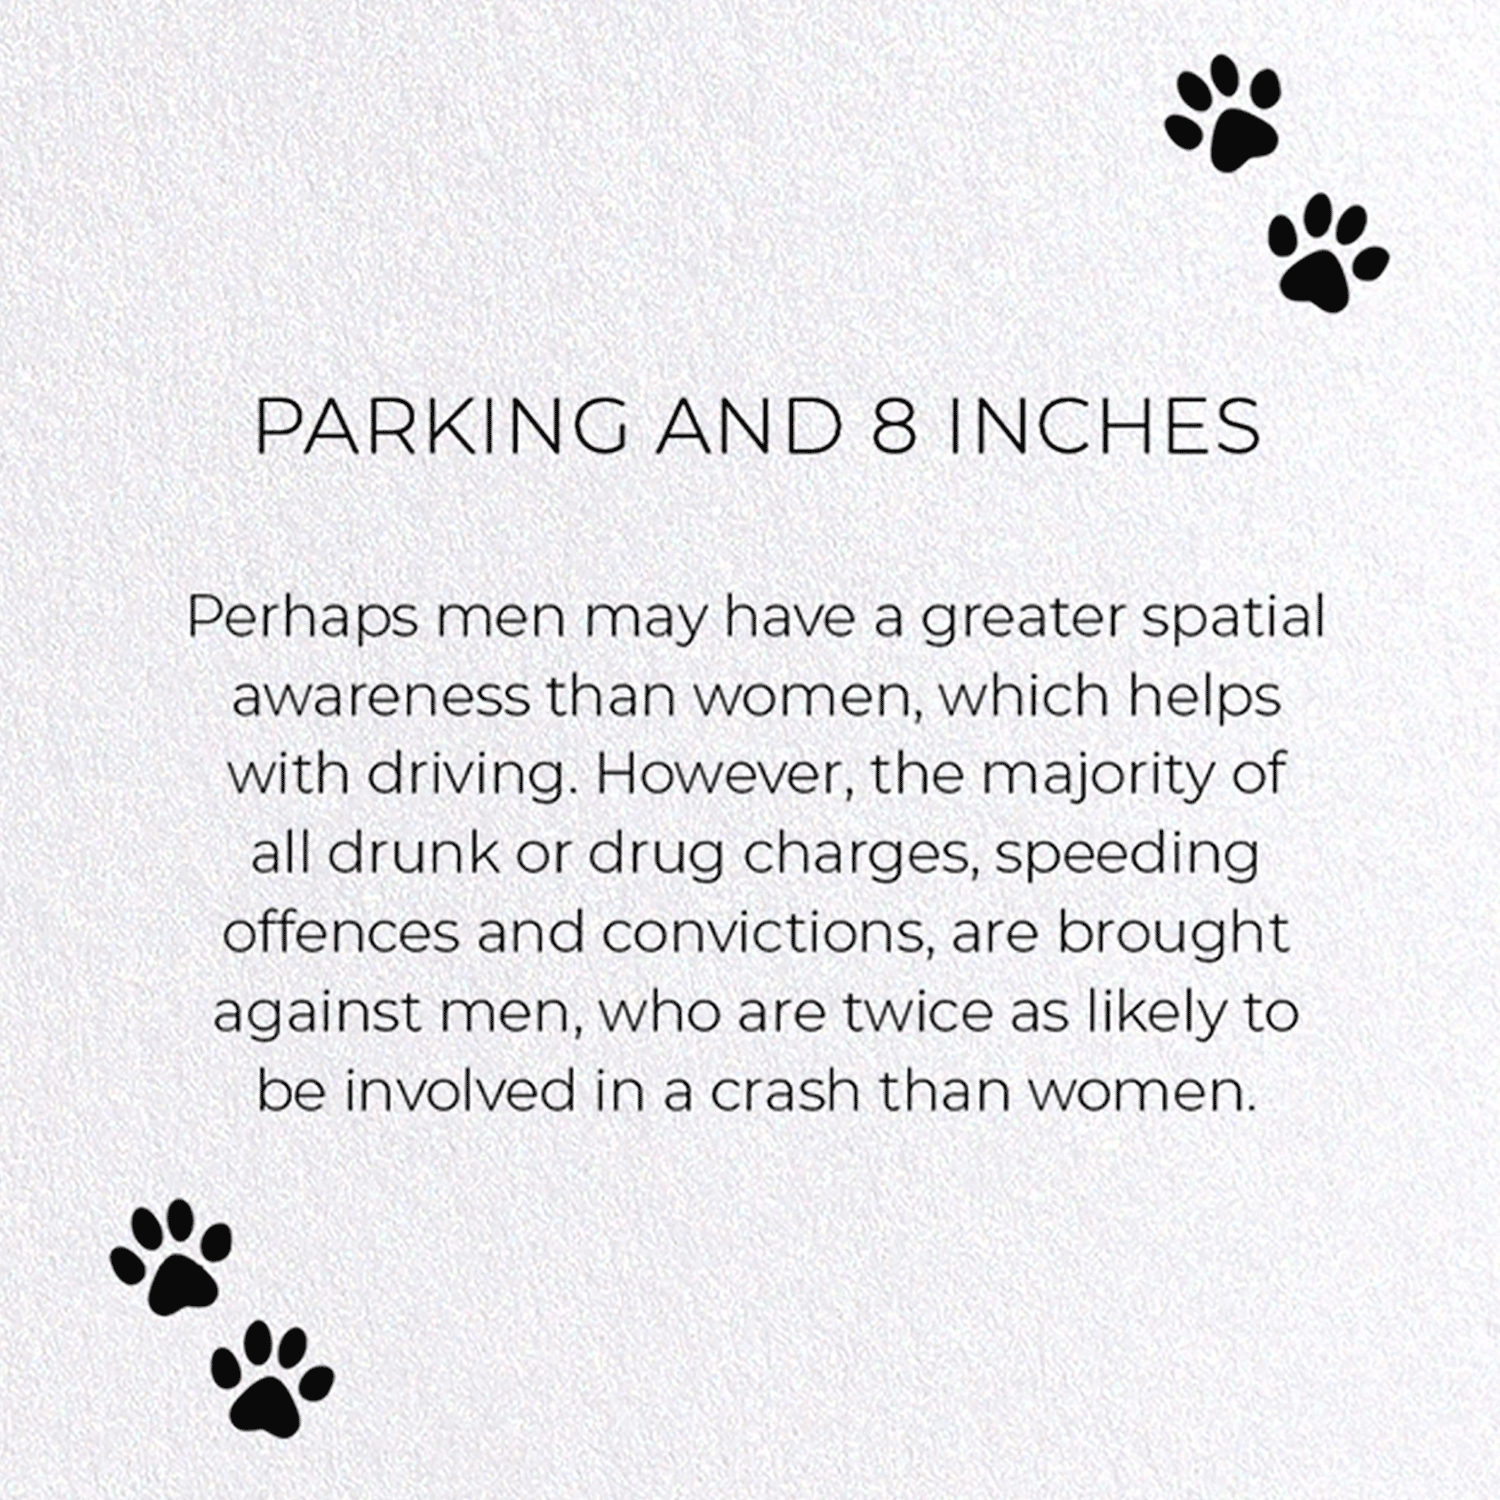 PARKING AND 8 INCHES: Funny Animal Greeting Card